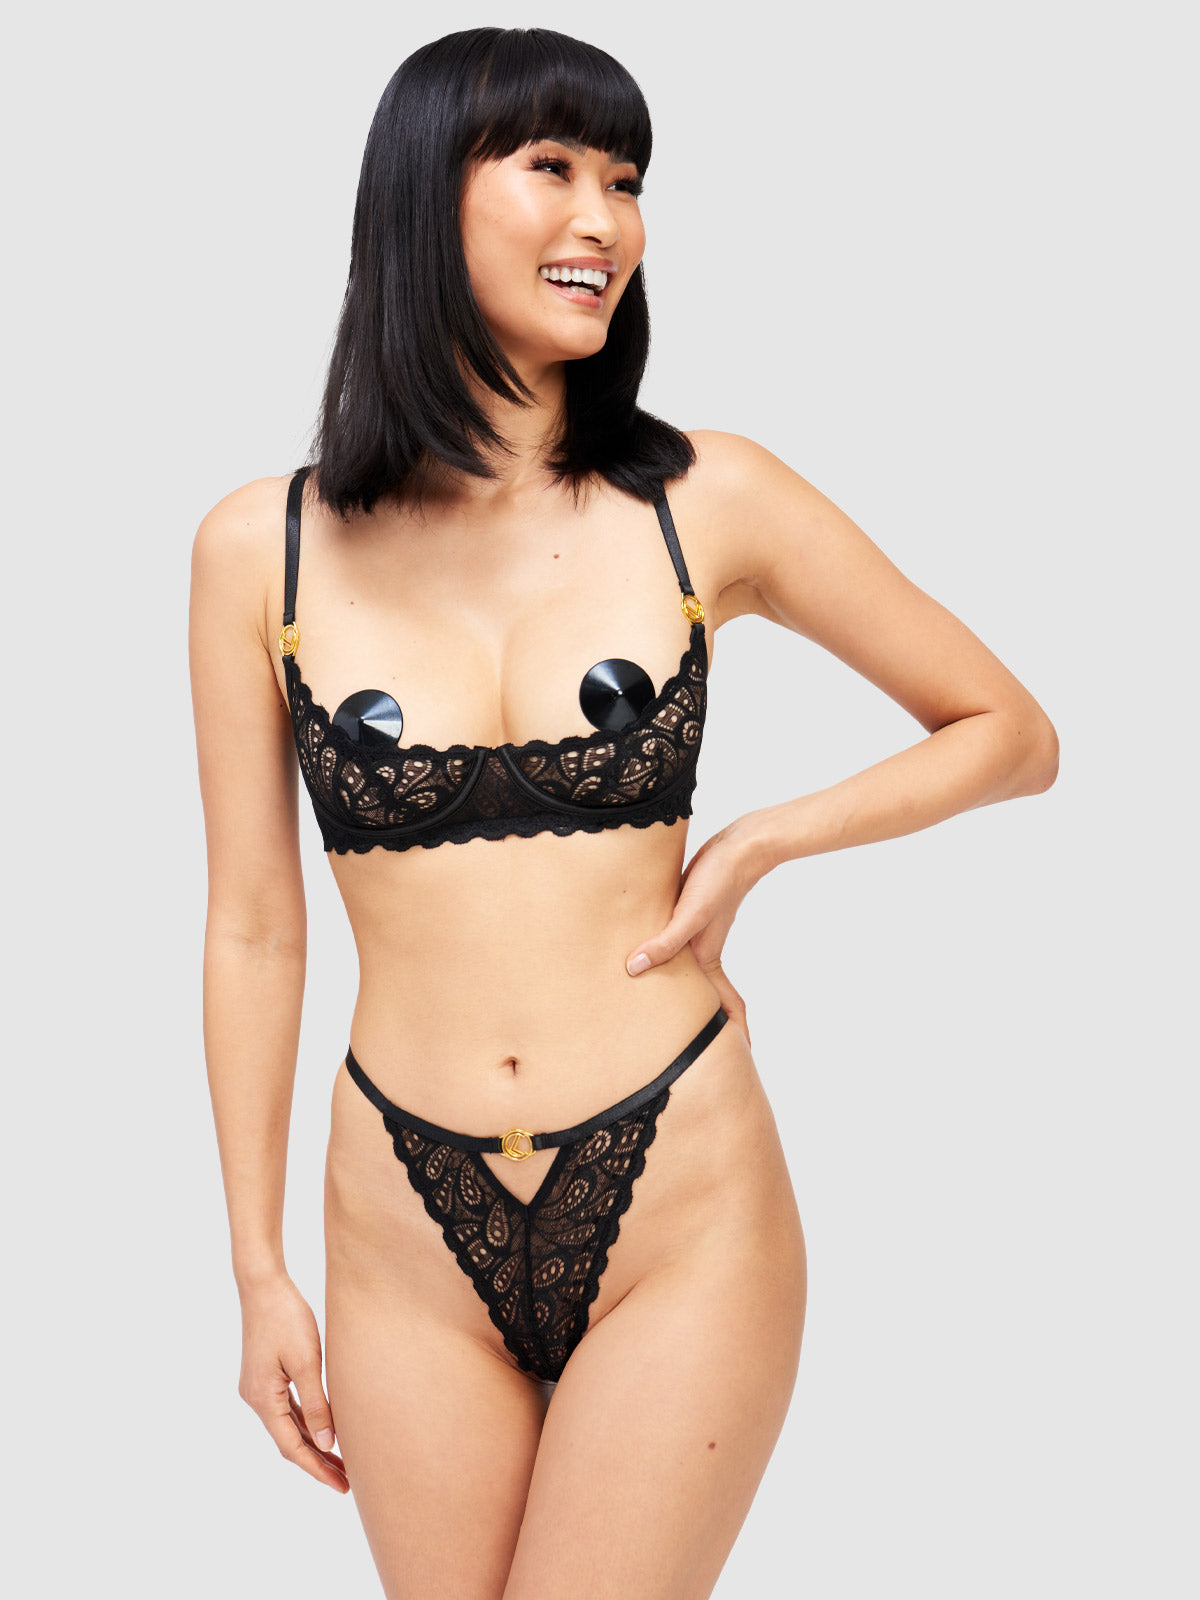 Brooke Lace Open Cup Bra Set - Fredericks of Hollywood